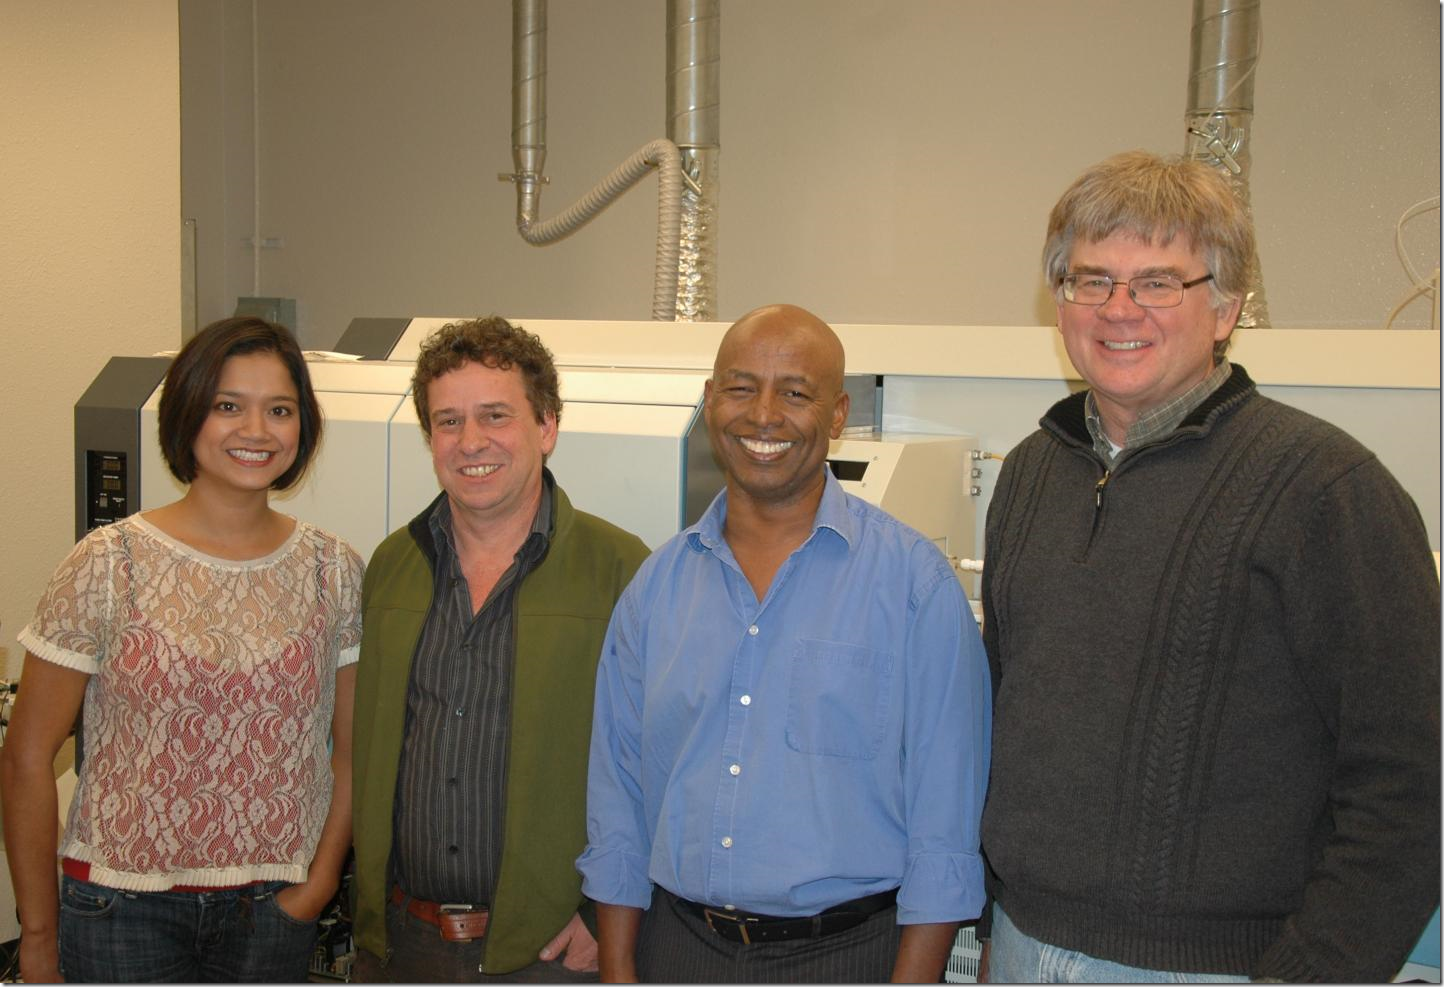 The University of New Mexico research team was led by Professor Yemane Asmerom (3rd from left) and included (l. to r.): Valorie Aquino, Keith Prufer and Victor Polyak. The team found contraction of the Intertropical Convergence Zone (ITCZ) during a warming Earth, leading in turn to drying of the Neotropics, including Central America. Credit: The University of New Mexico